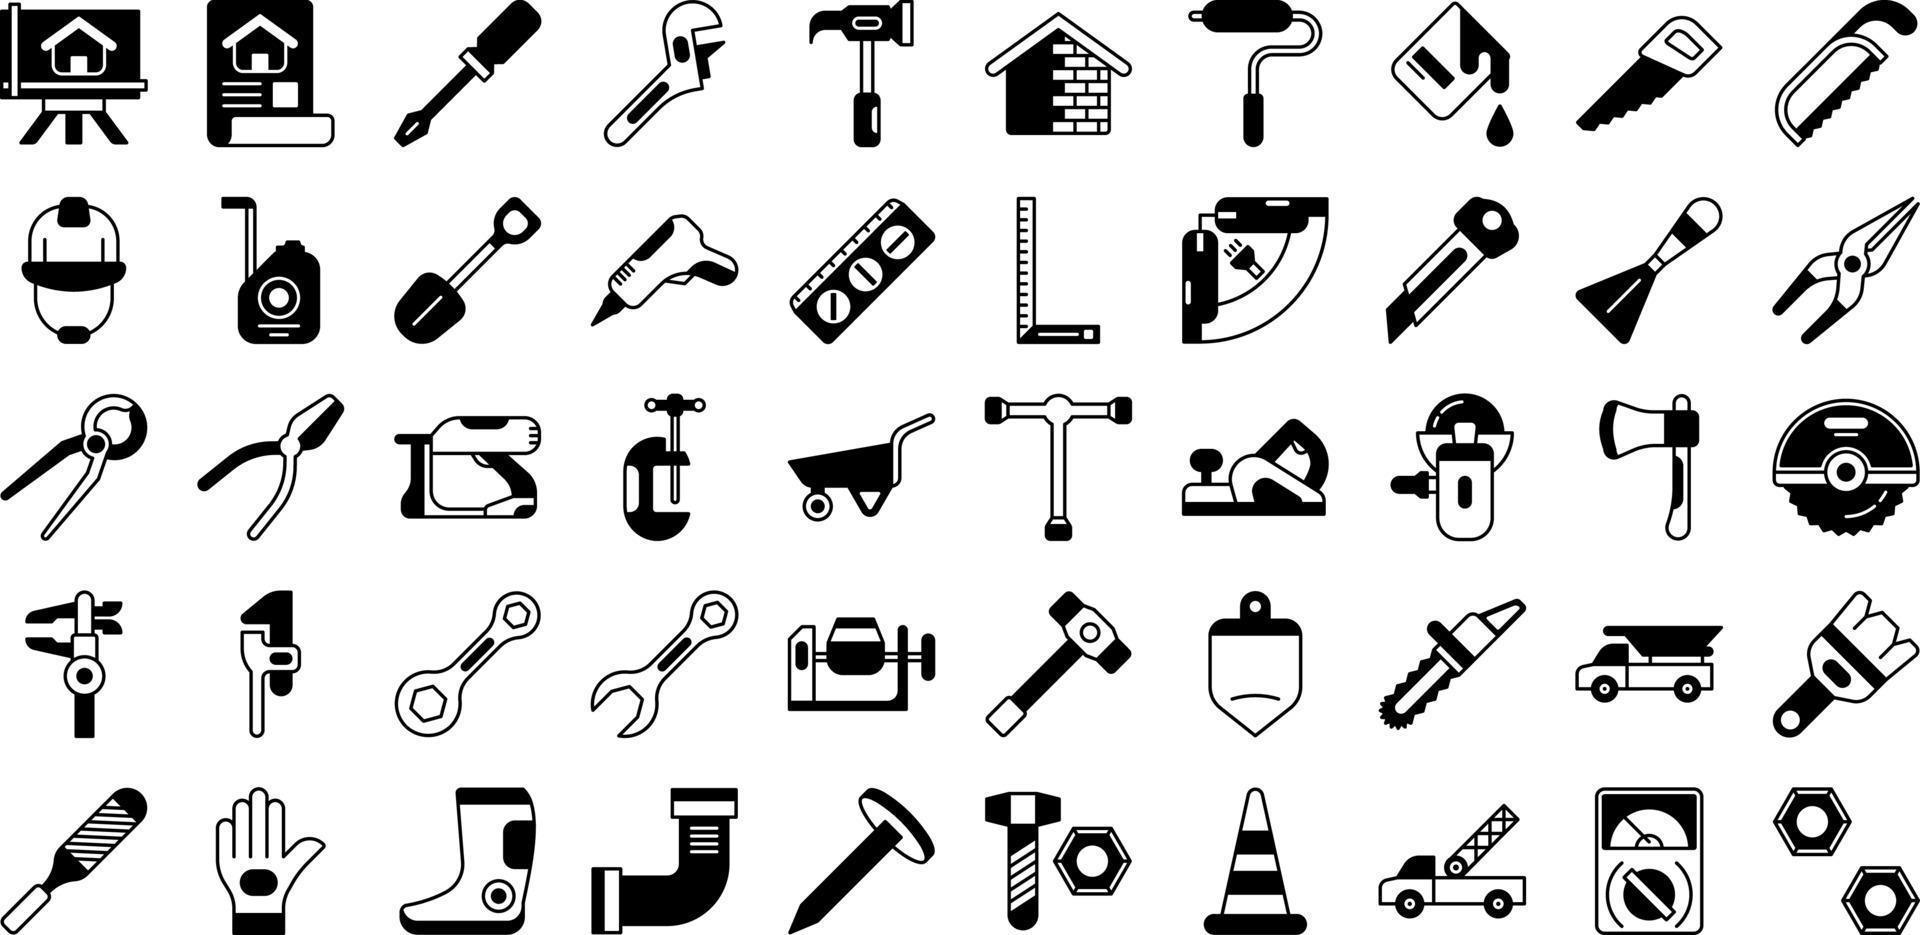 set of construction and tools icons on a transparent background vector